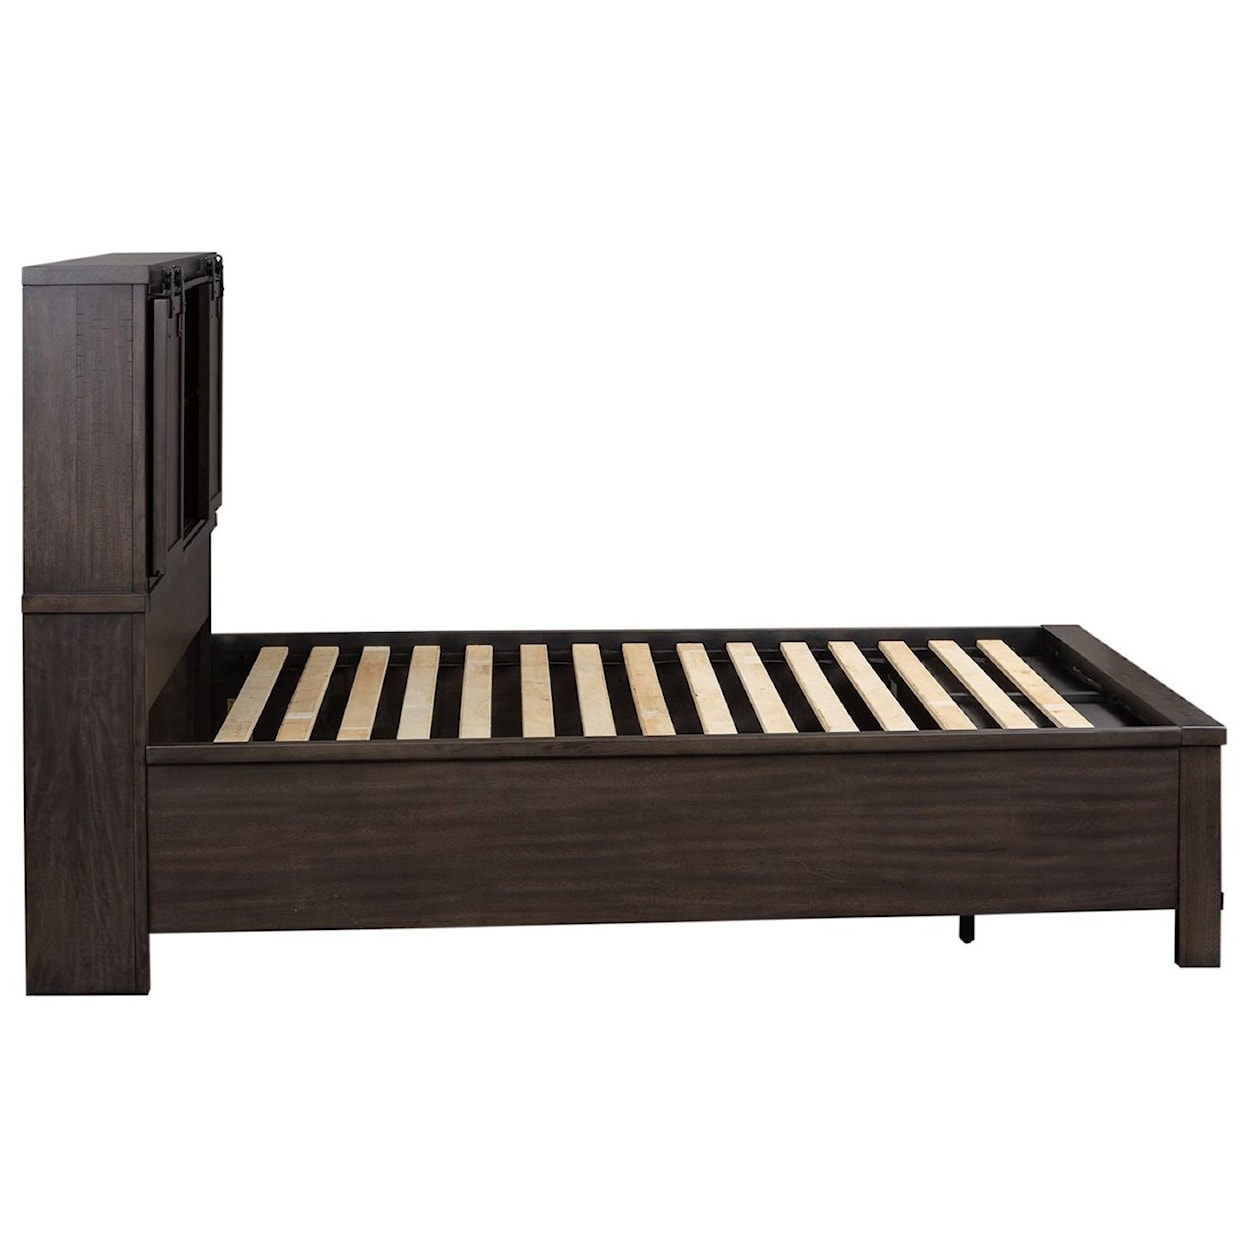 Libby Thornwood Hills Queen Bookcase Bed